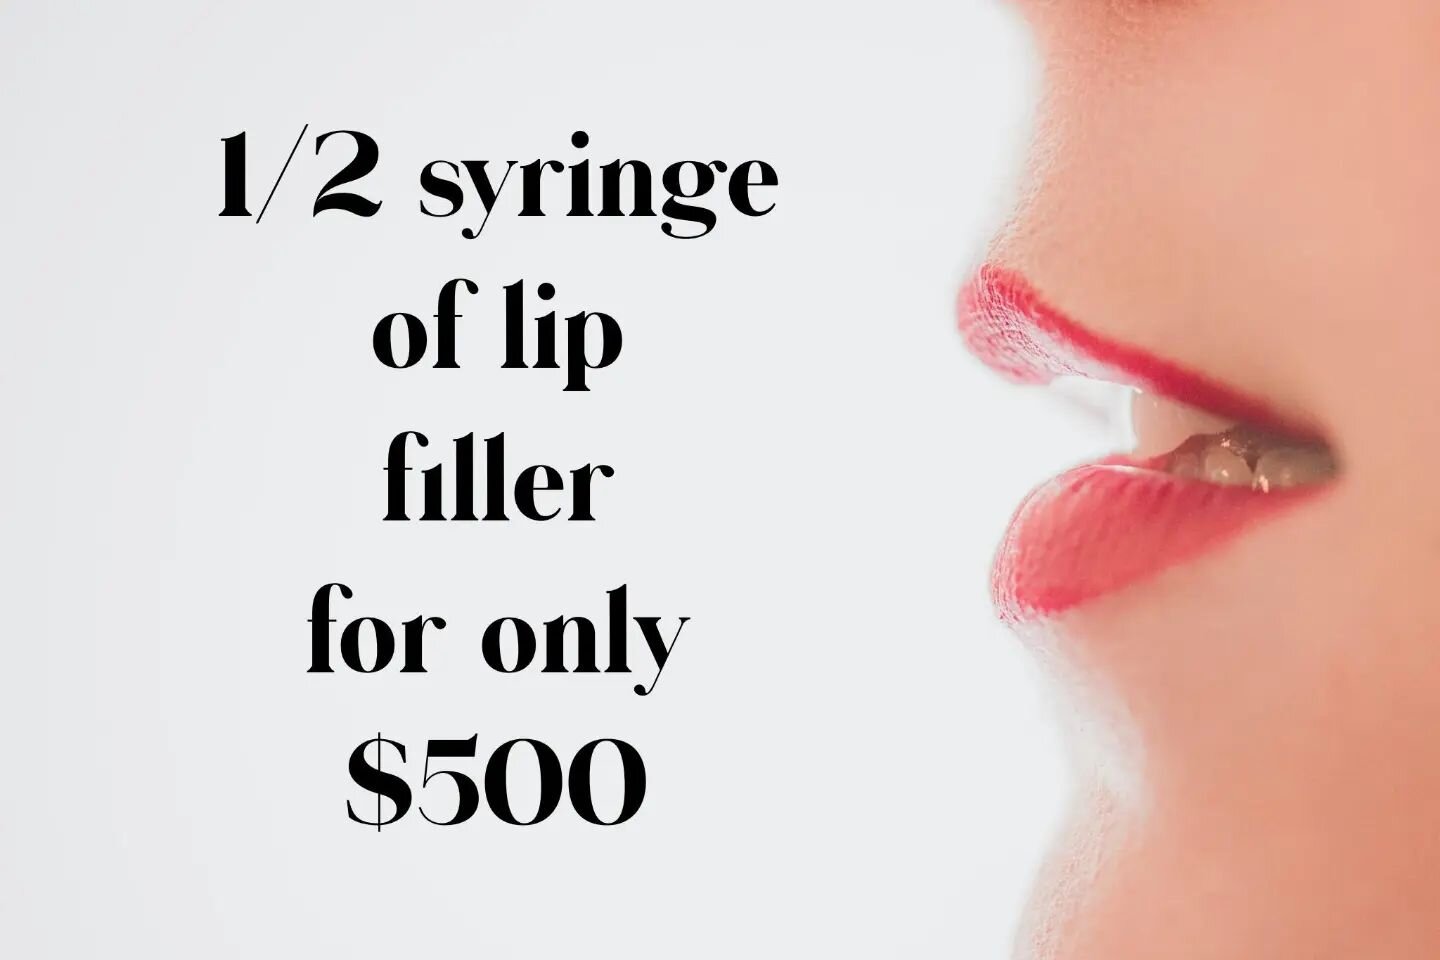 💋1/2 syringe of filler for $500. 
Not applicable with Alle points or Alle savings. Anchor members may use $50 savings included in membership. Schedule a consultation today. ☎️410-304-2051